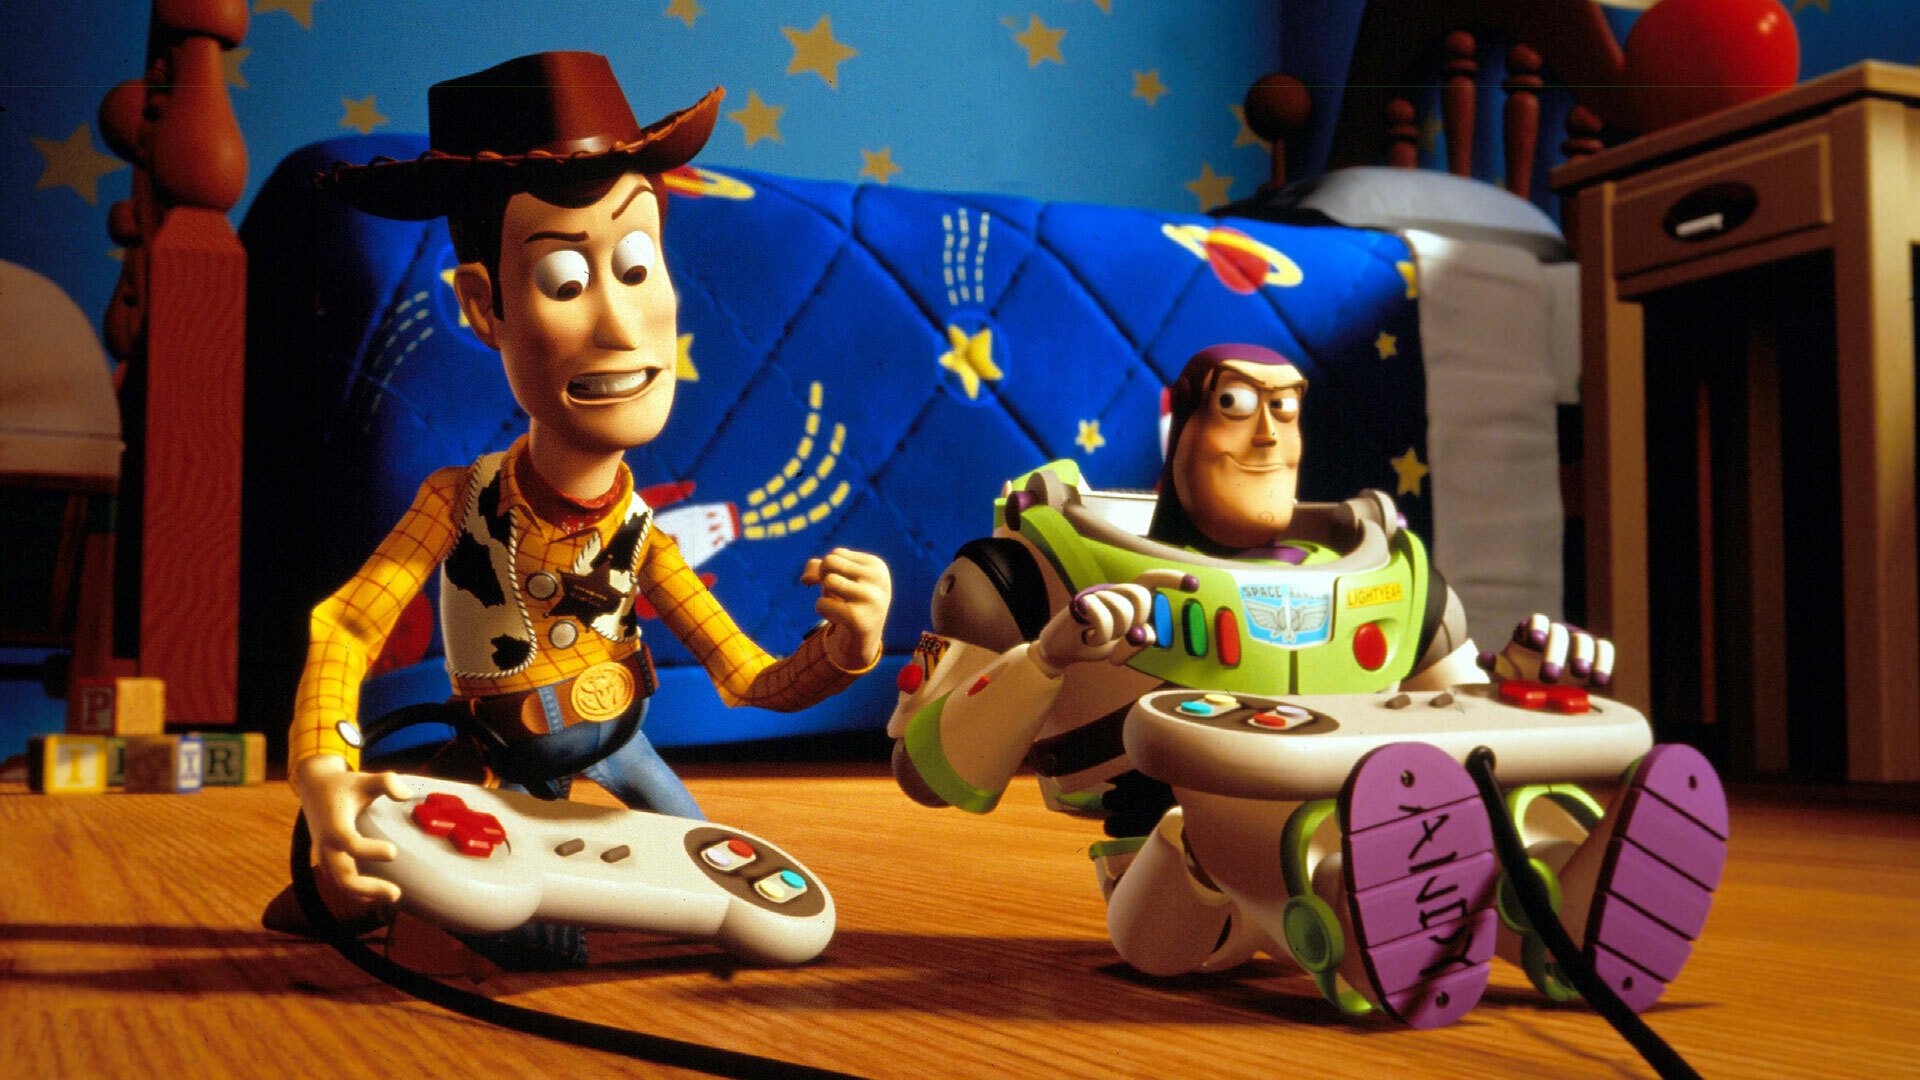 A still from "Toy Story 2." Woody and Buzz Lightyear sit side by side in a child's bedroom. They're both holding video game controllers.